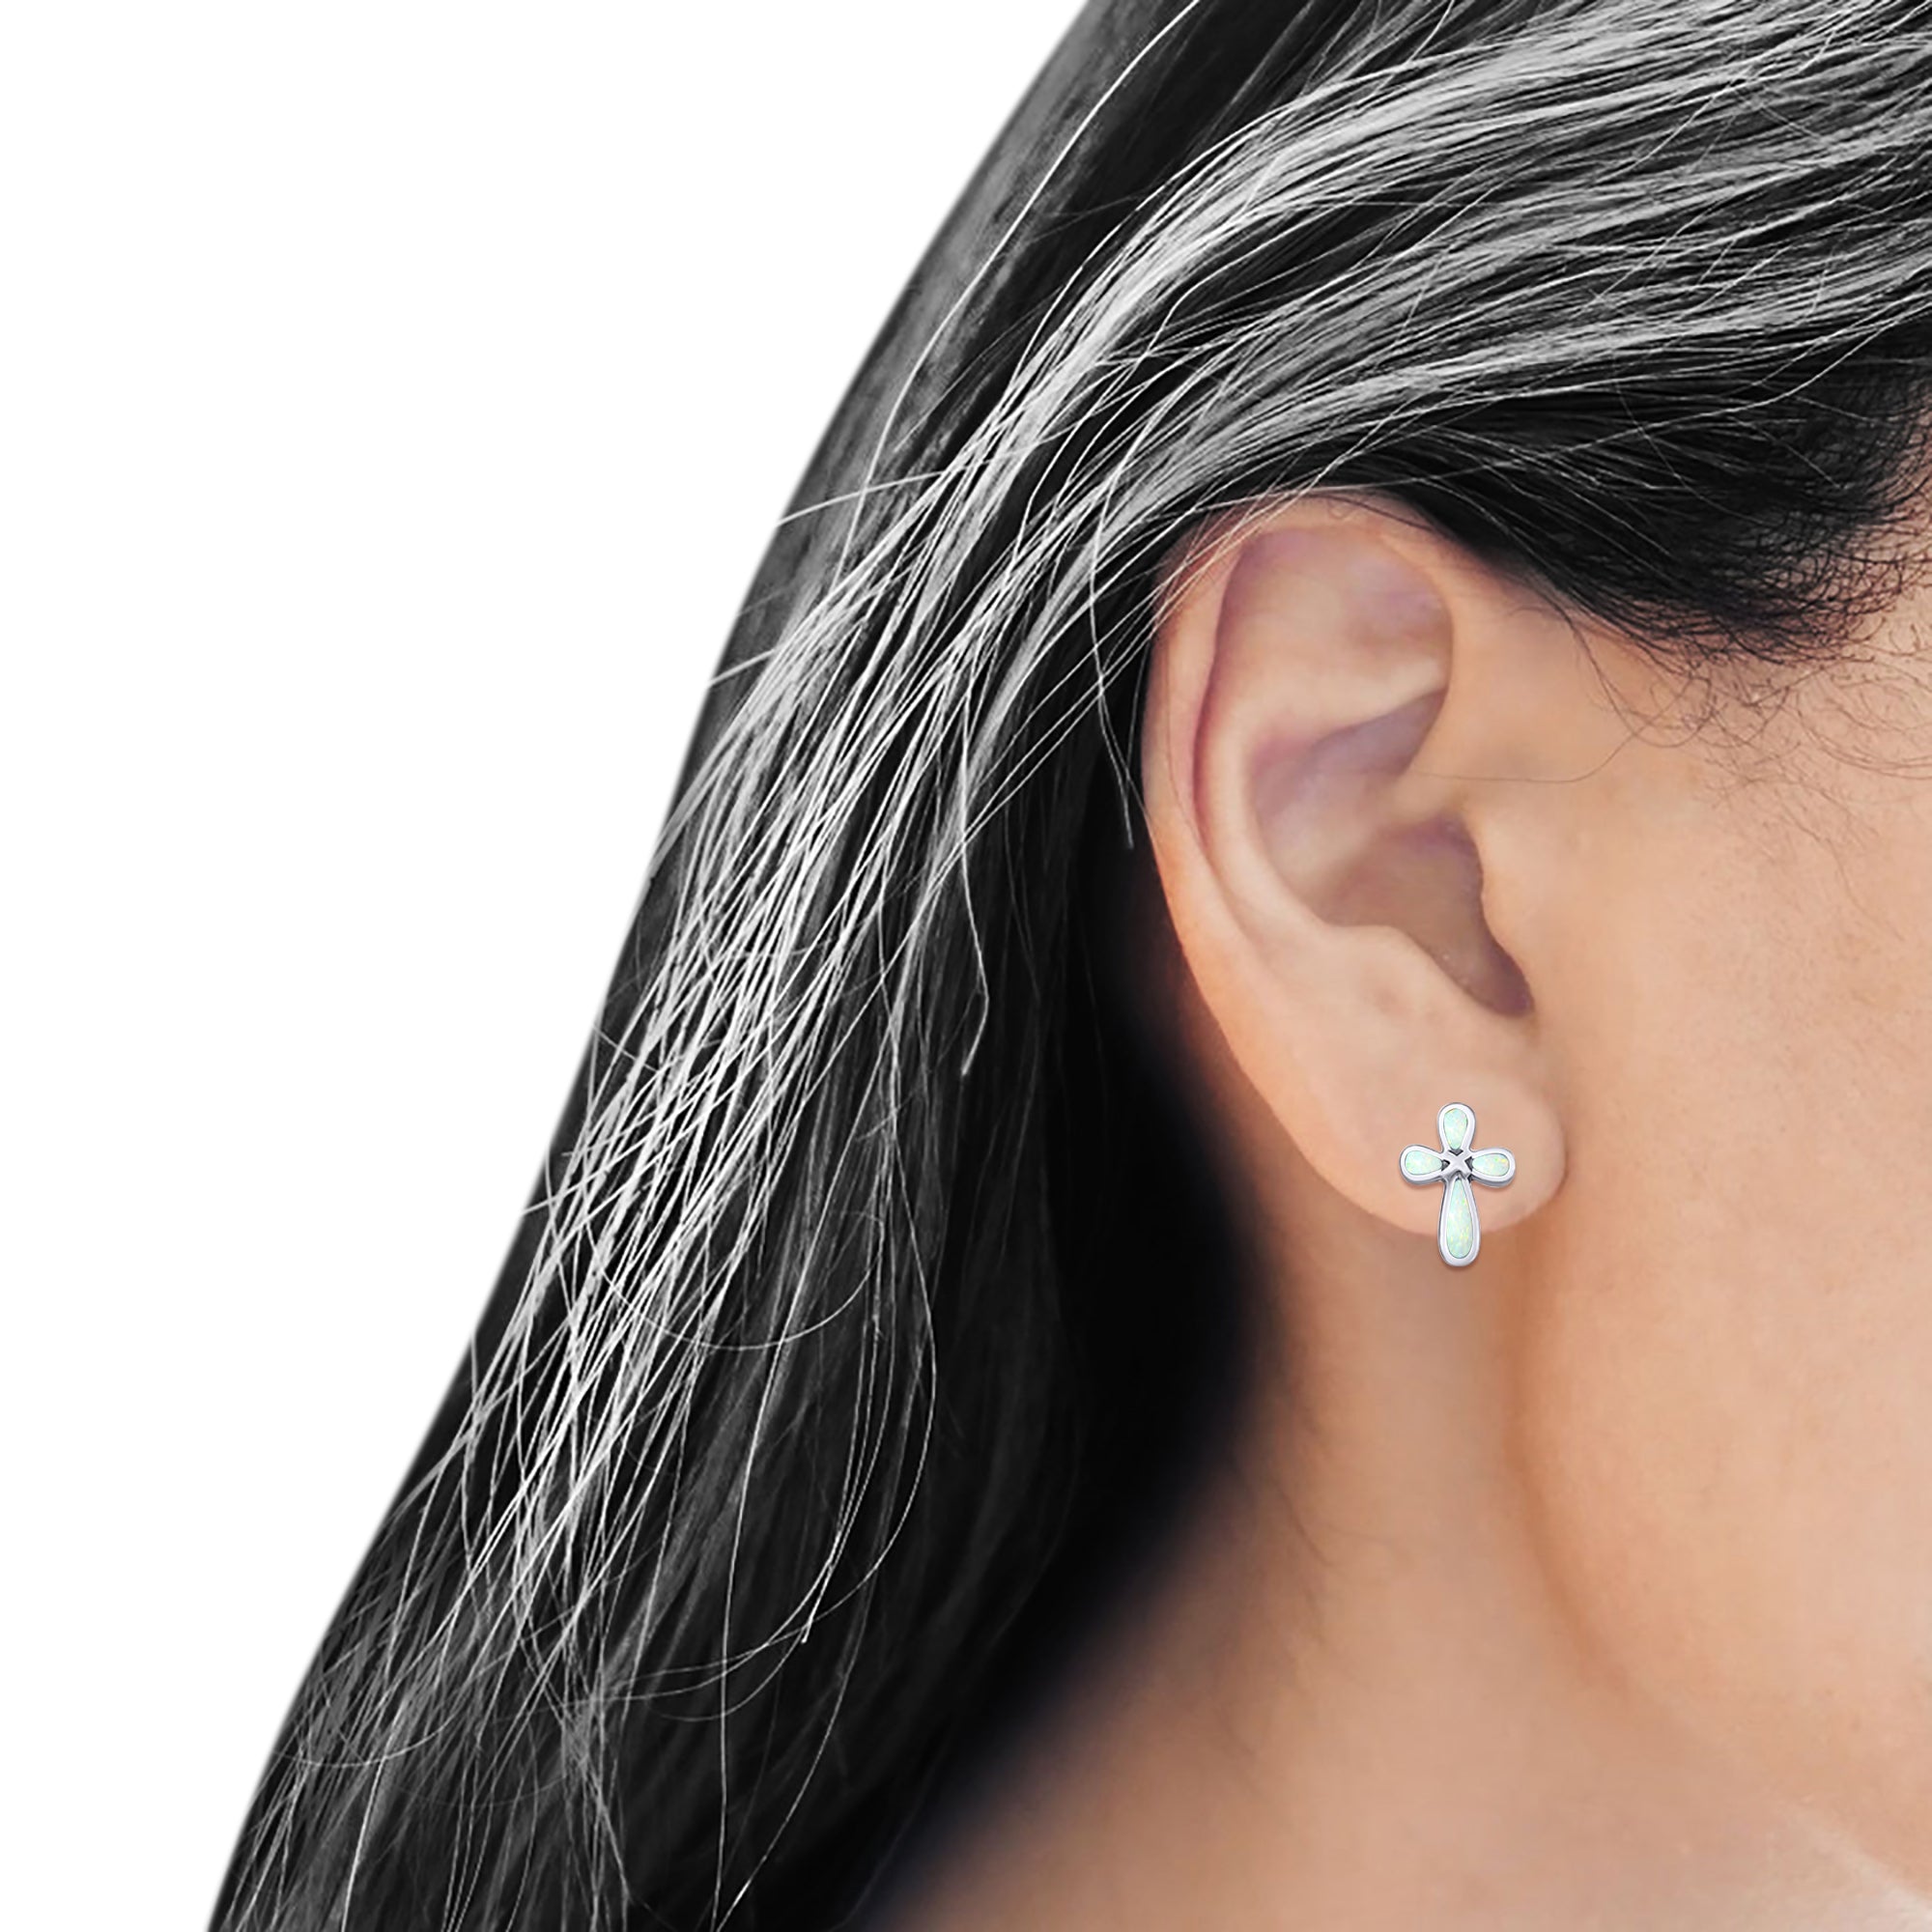 Cross Stud Earring Created White Opal Solid 925 Sterling Silver (12.6mm)